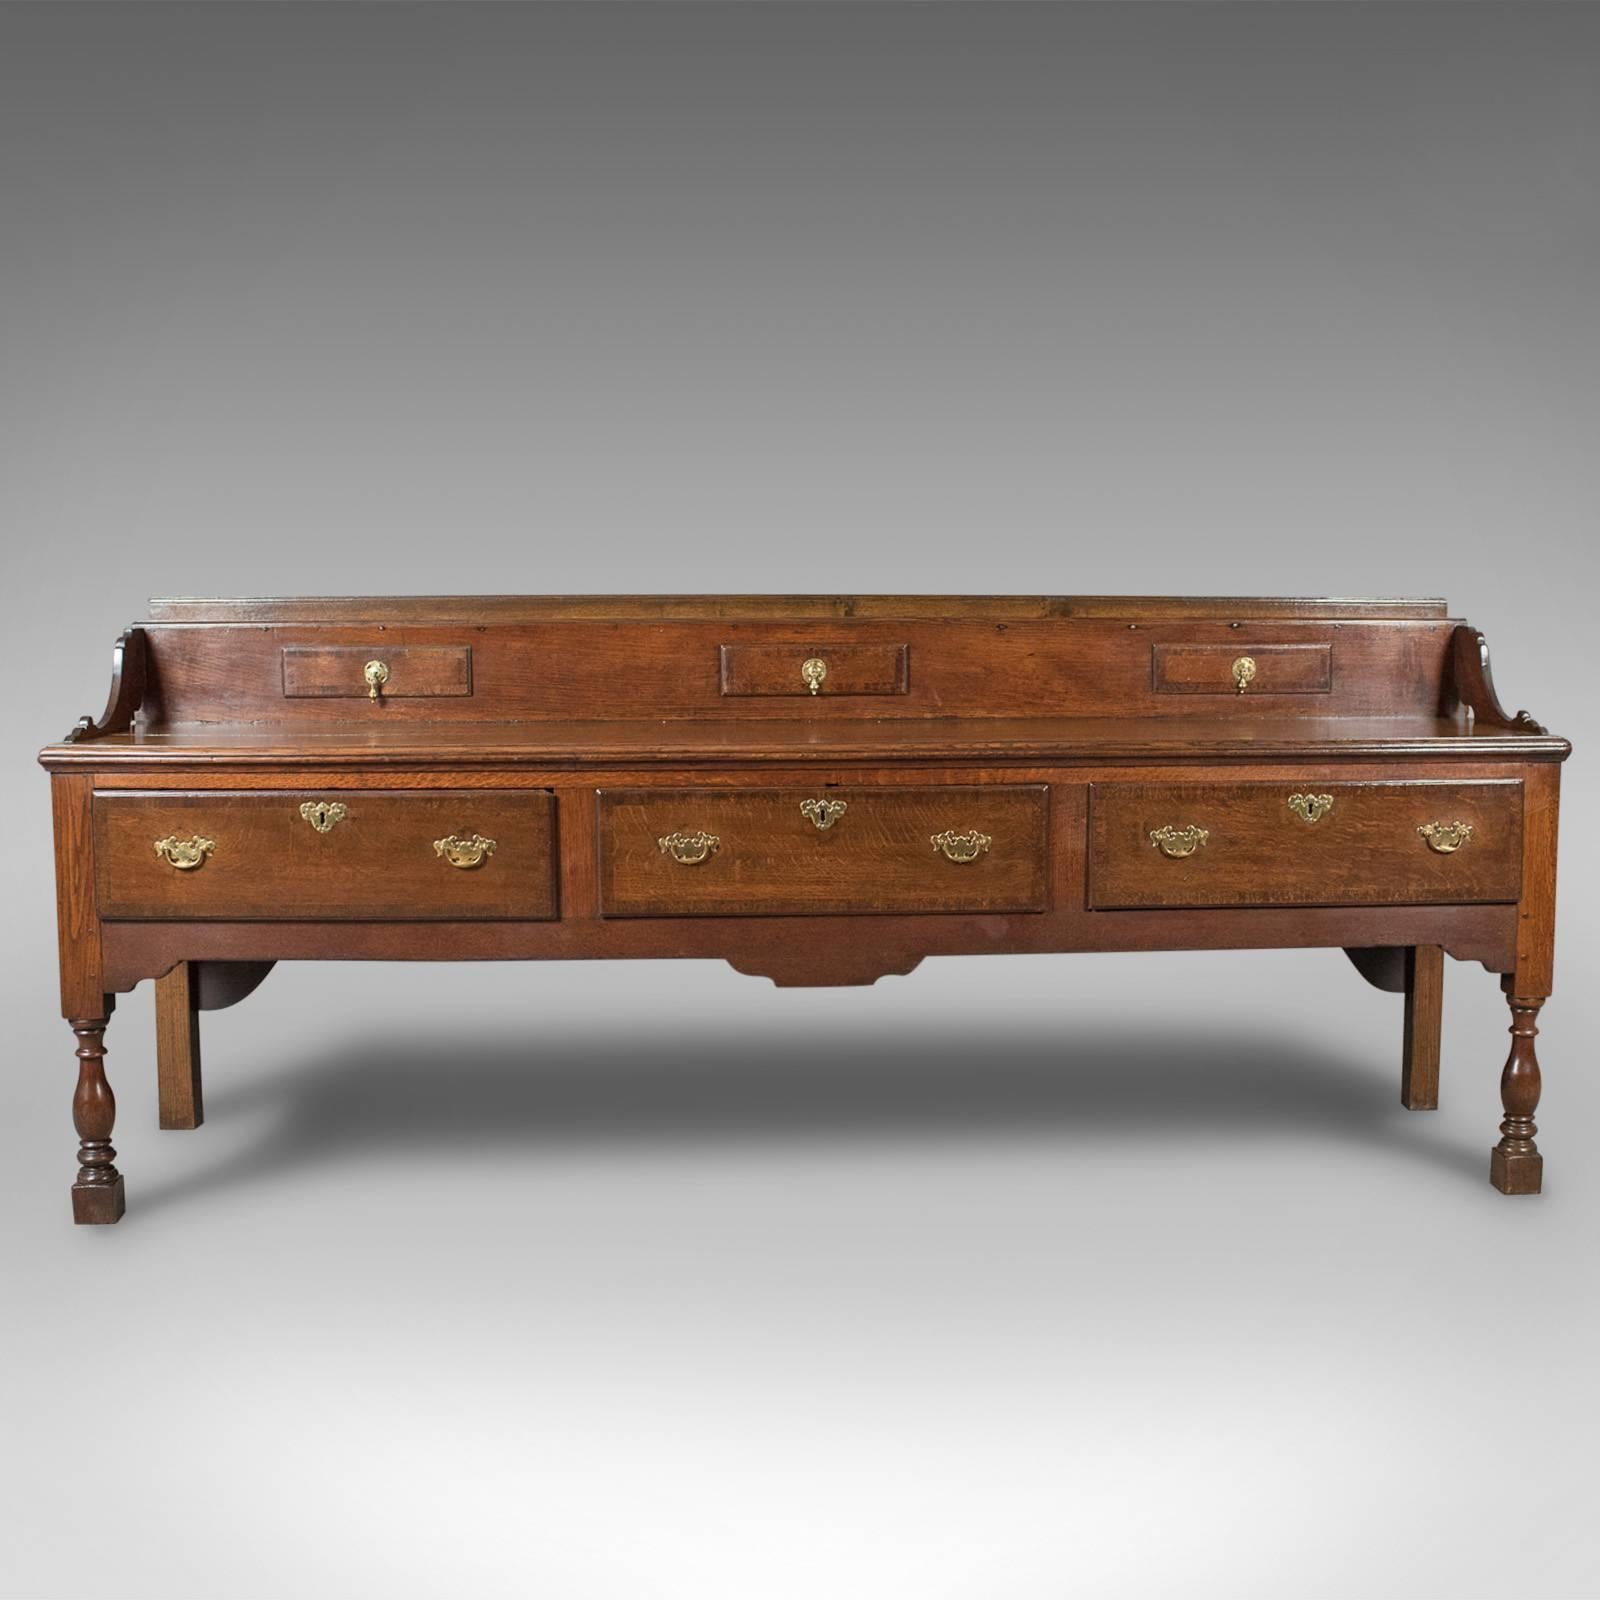 This is a large antique dresser base from the early Georgian period, 1750 and later, English in oak.

Of grand, country house, proportions and quality
In English oak displaying wisps of medullary rays
Desirable color in a waxed finish with an